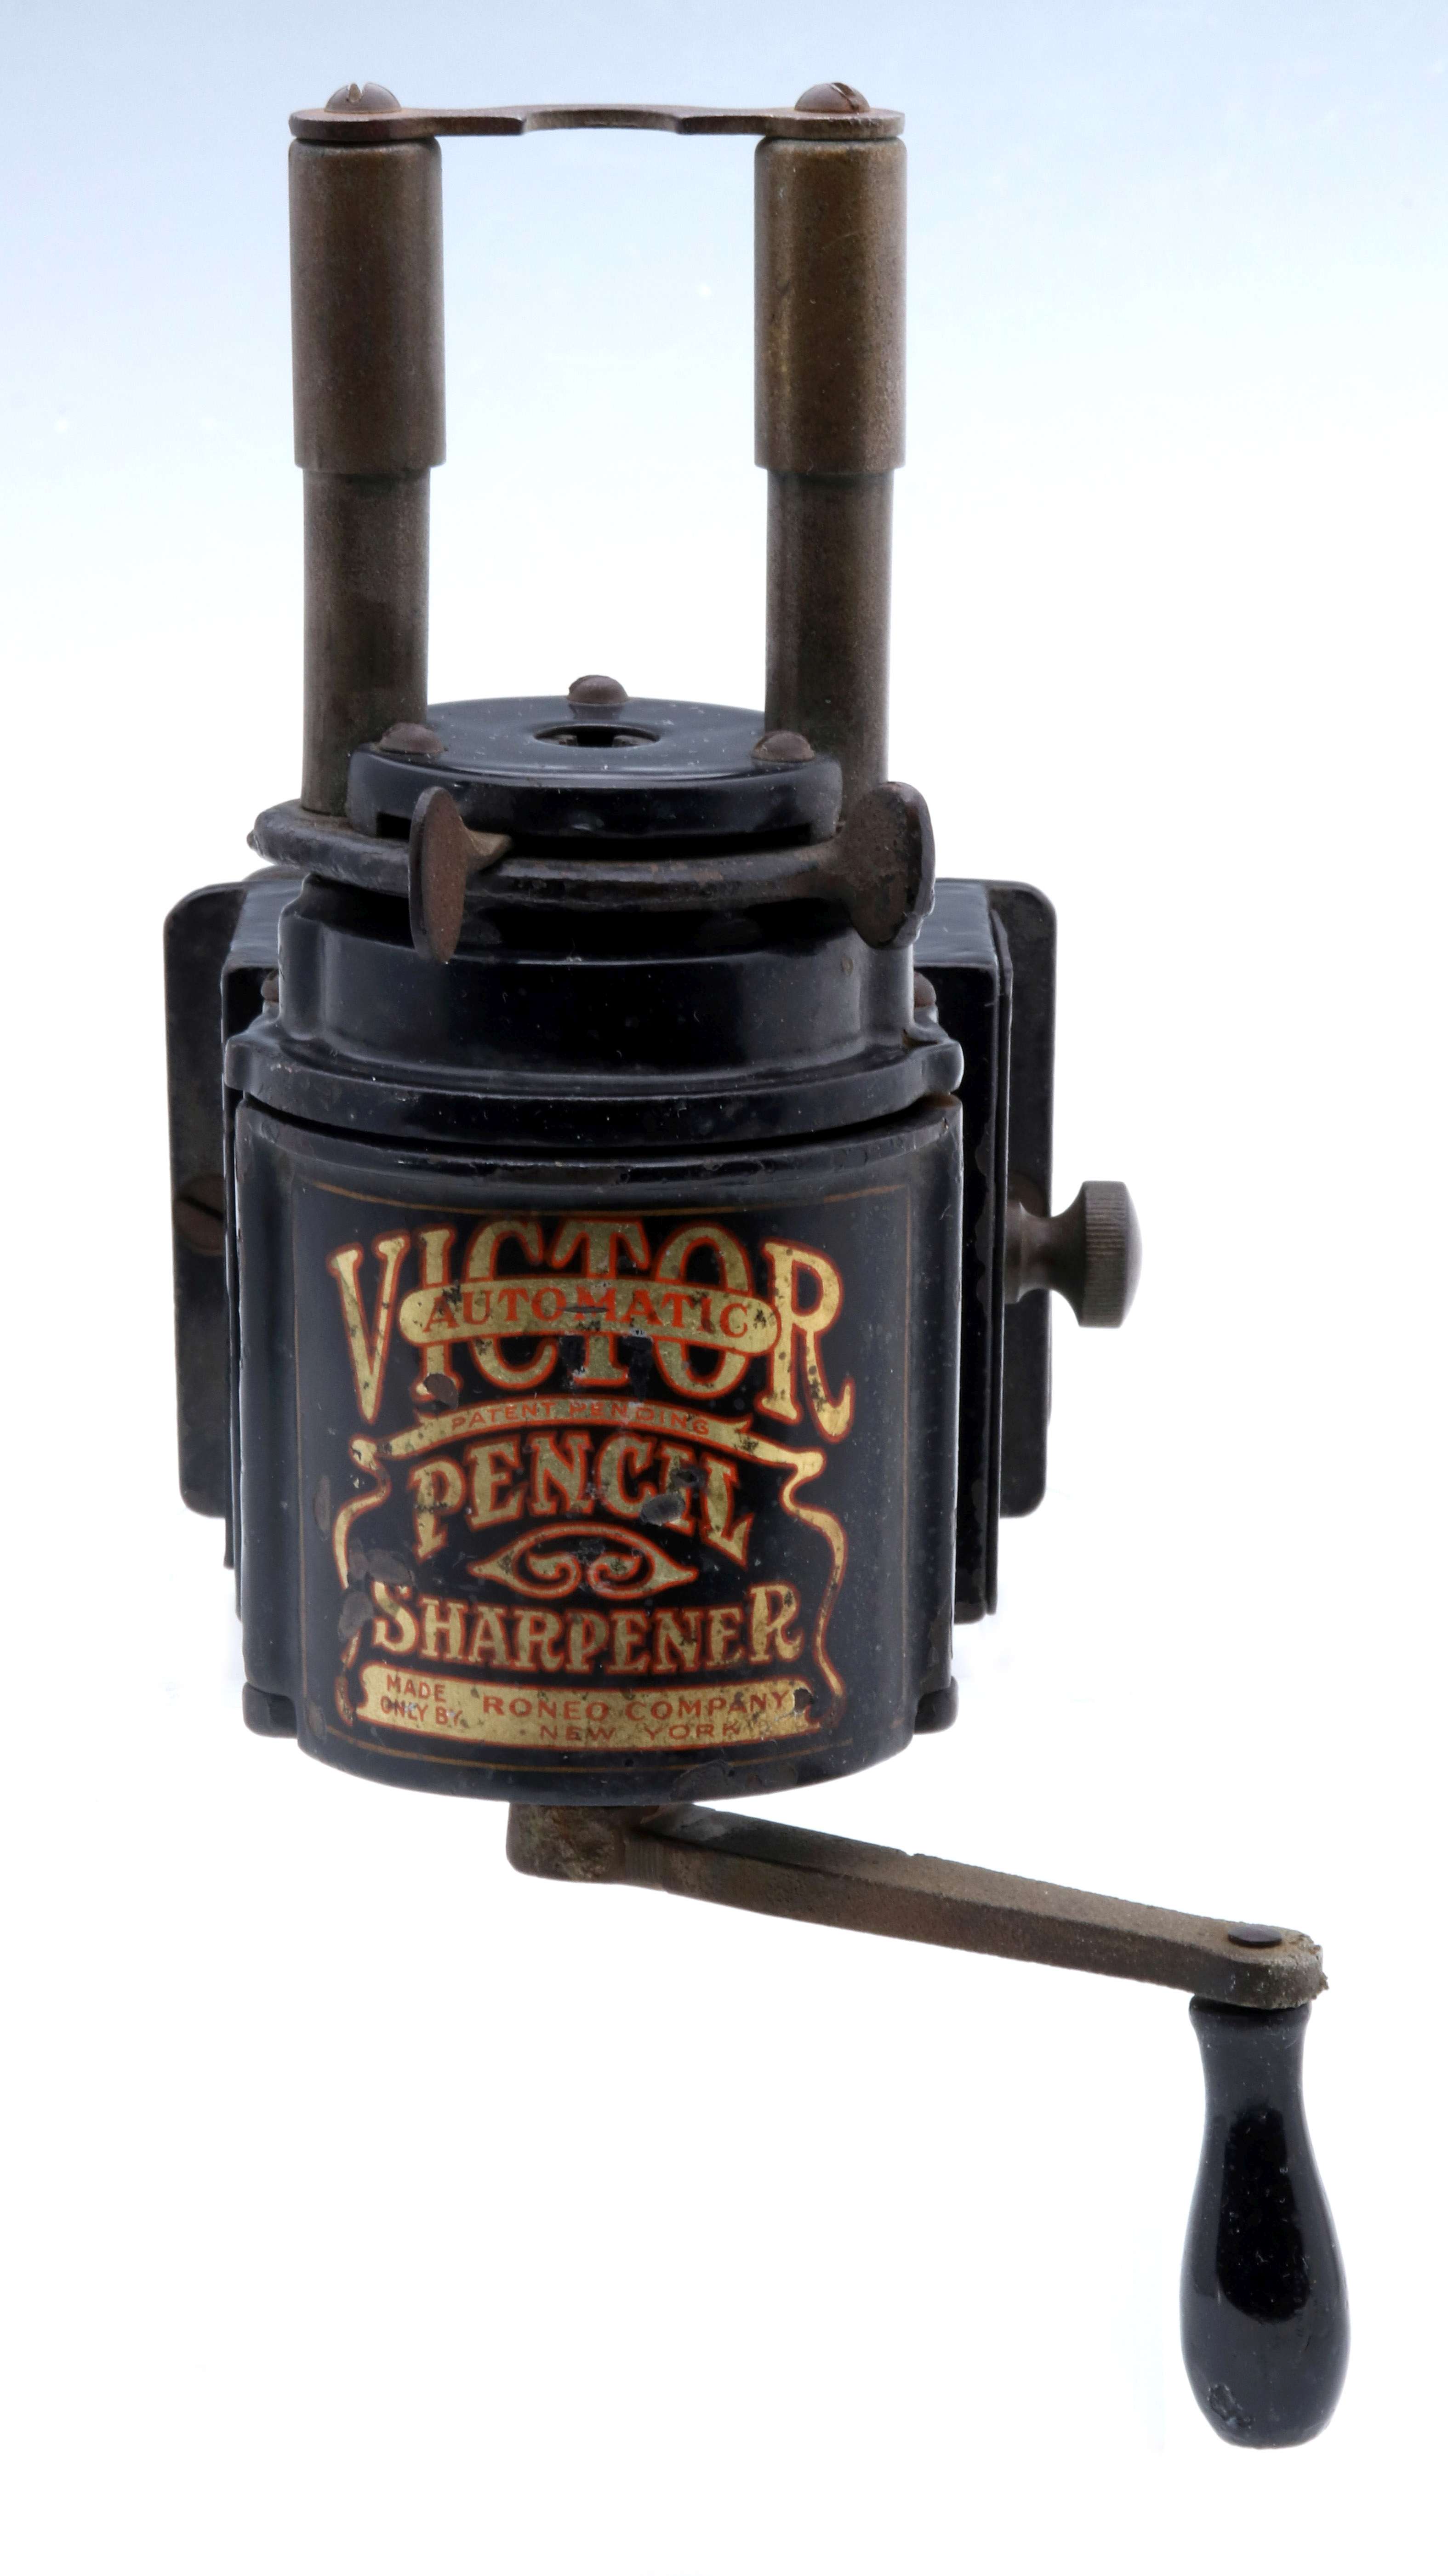 A 'VICTOR AUTOMATIC' RONEO PENCIL SHARPENER, 1913